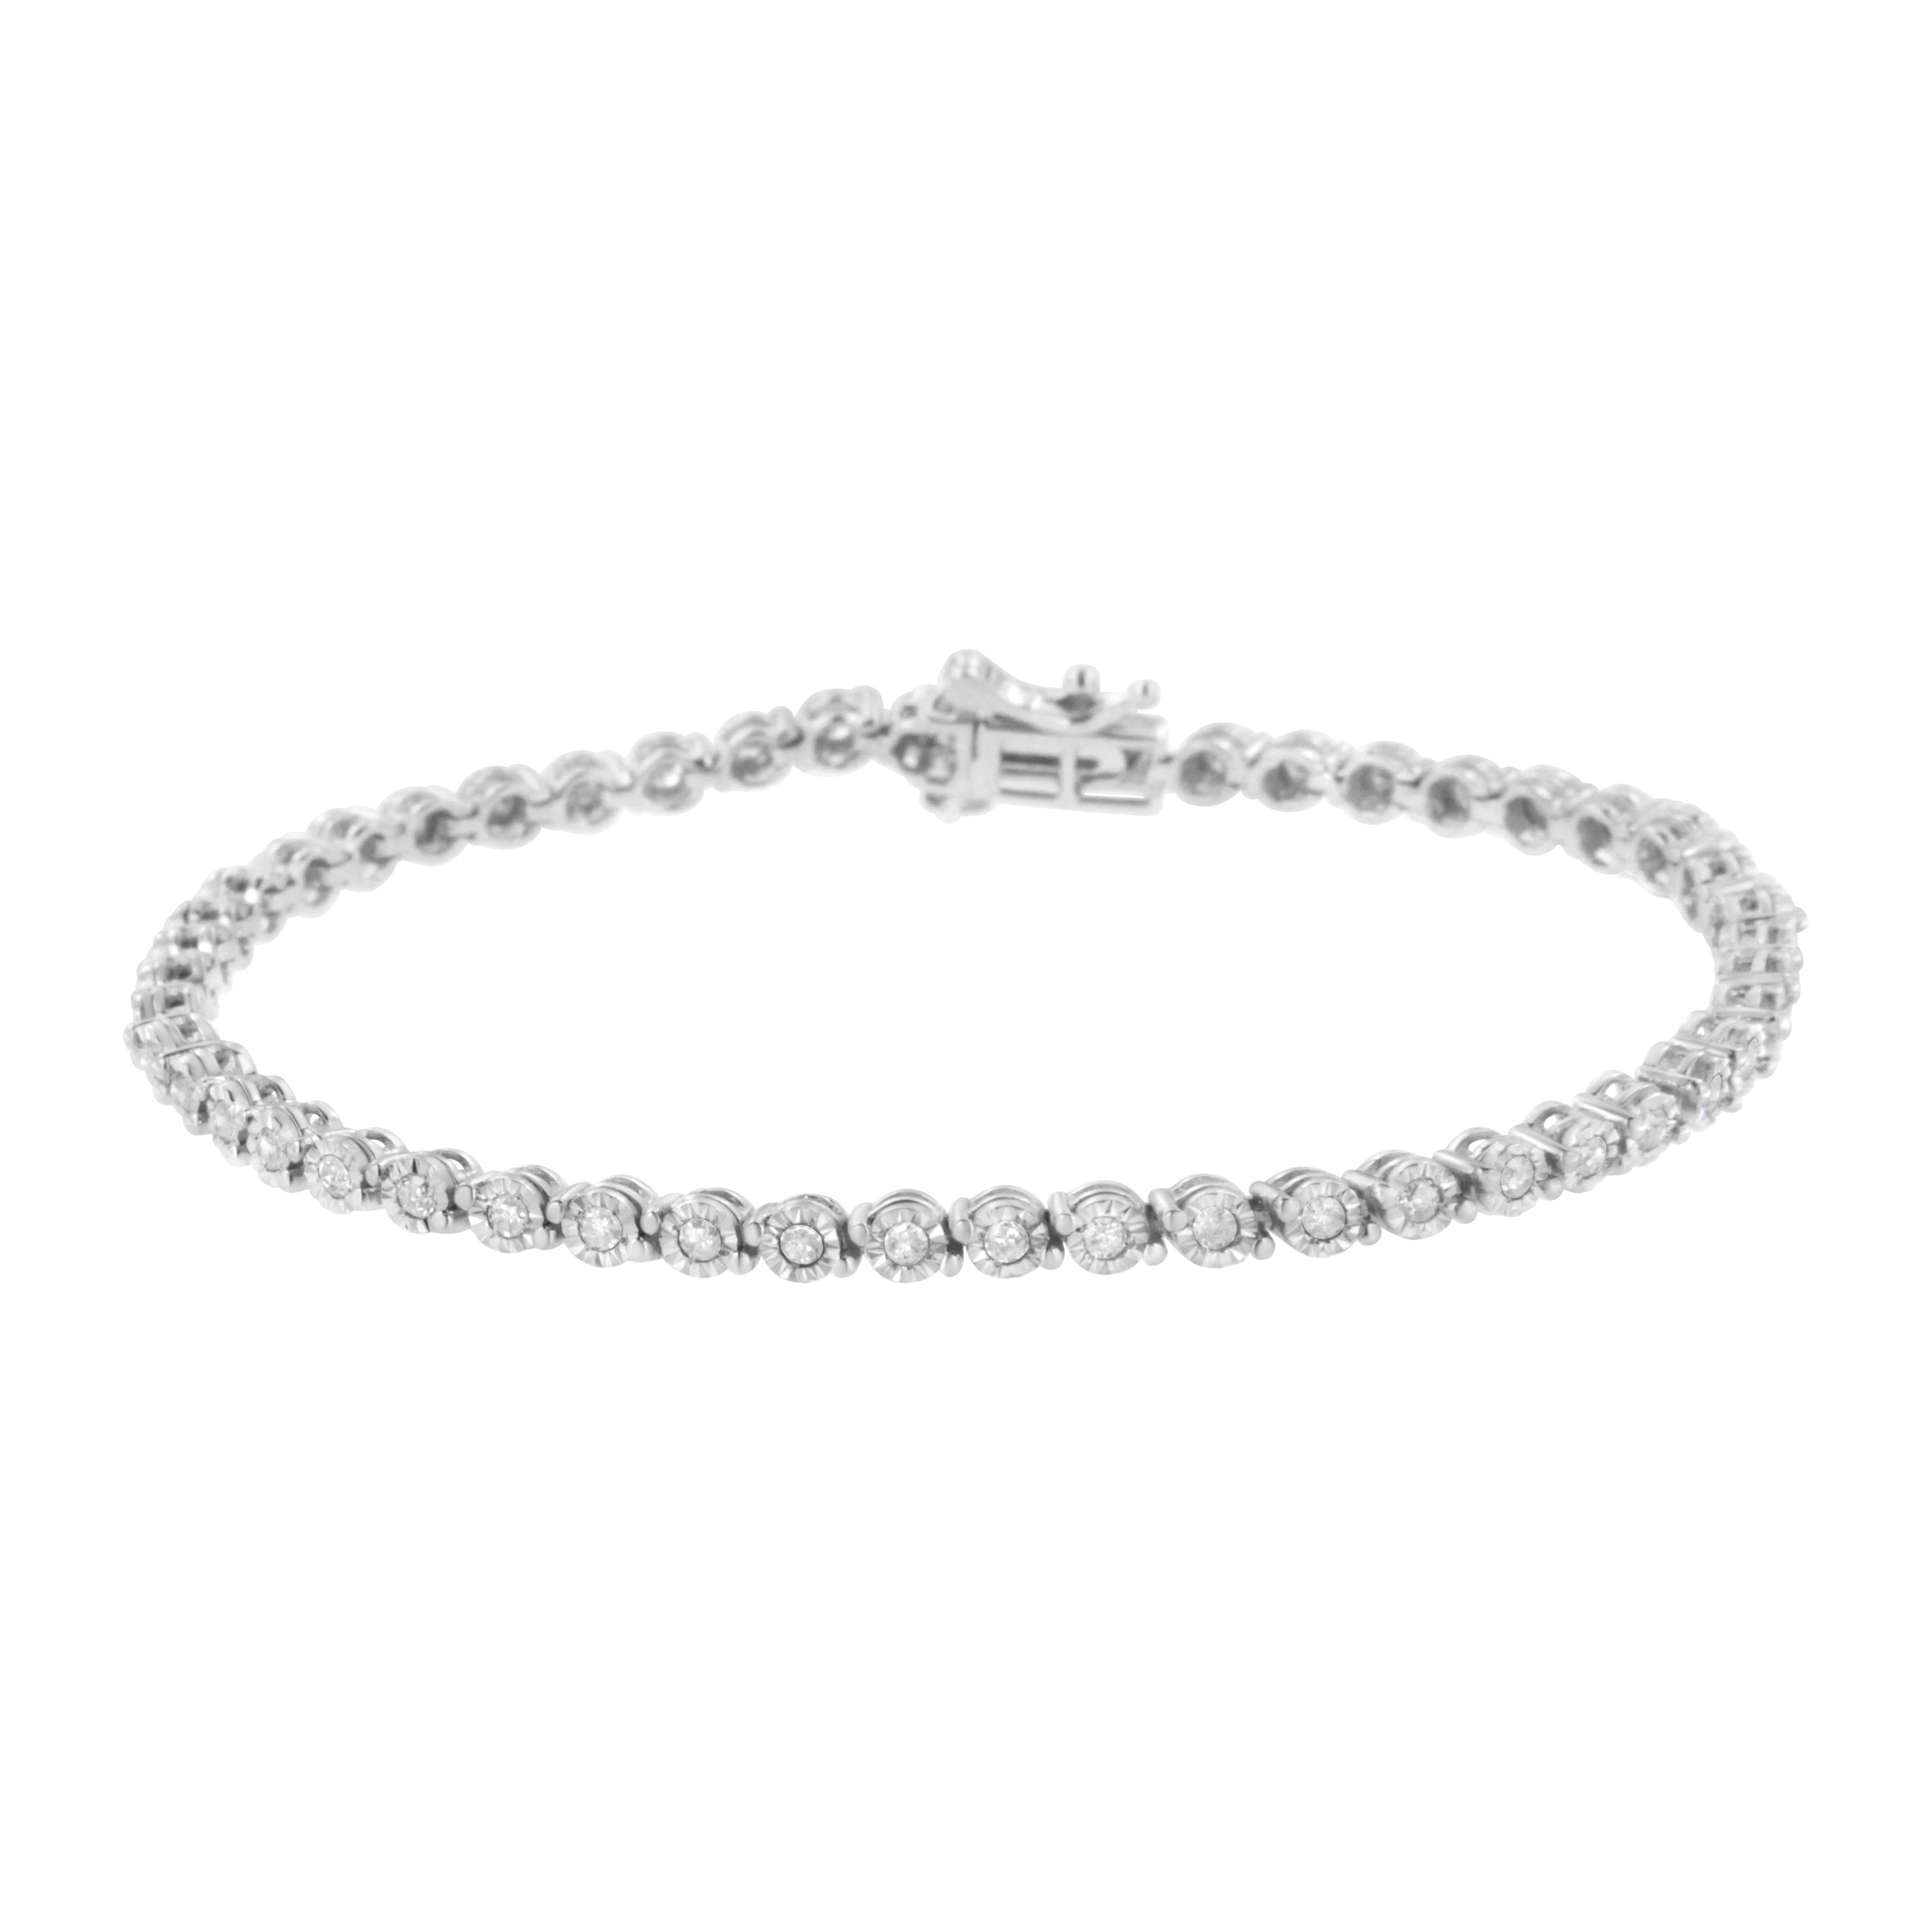 This classic link bracelet will become a staple in your jewelry collection. Created in glimmering .925 sterling silver, this piece has bezel-set links embellished with beautiful, natural round-cut diamonds. Boasting an impressive total diamond